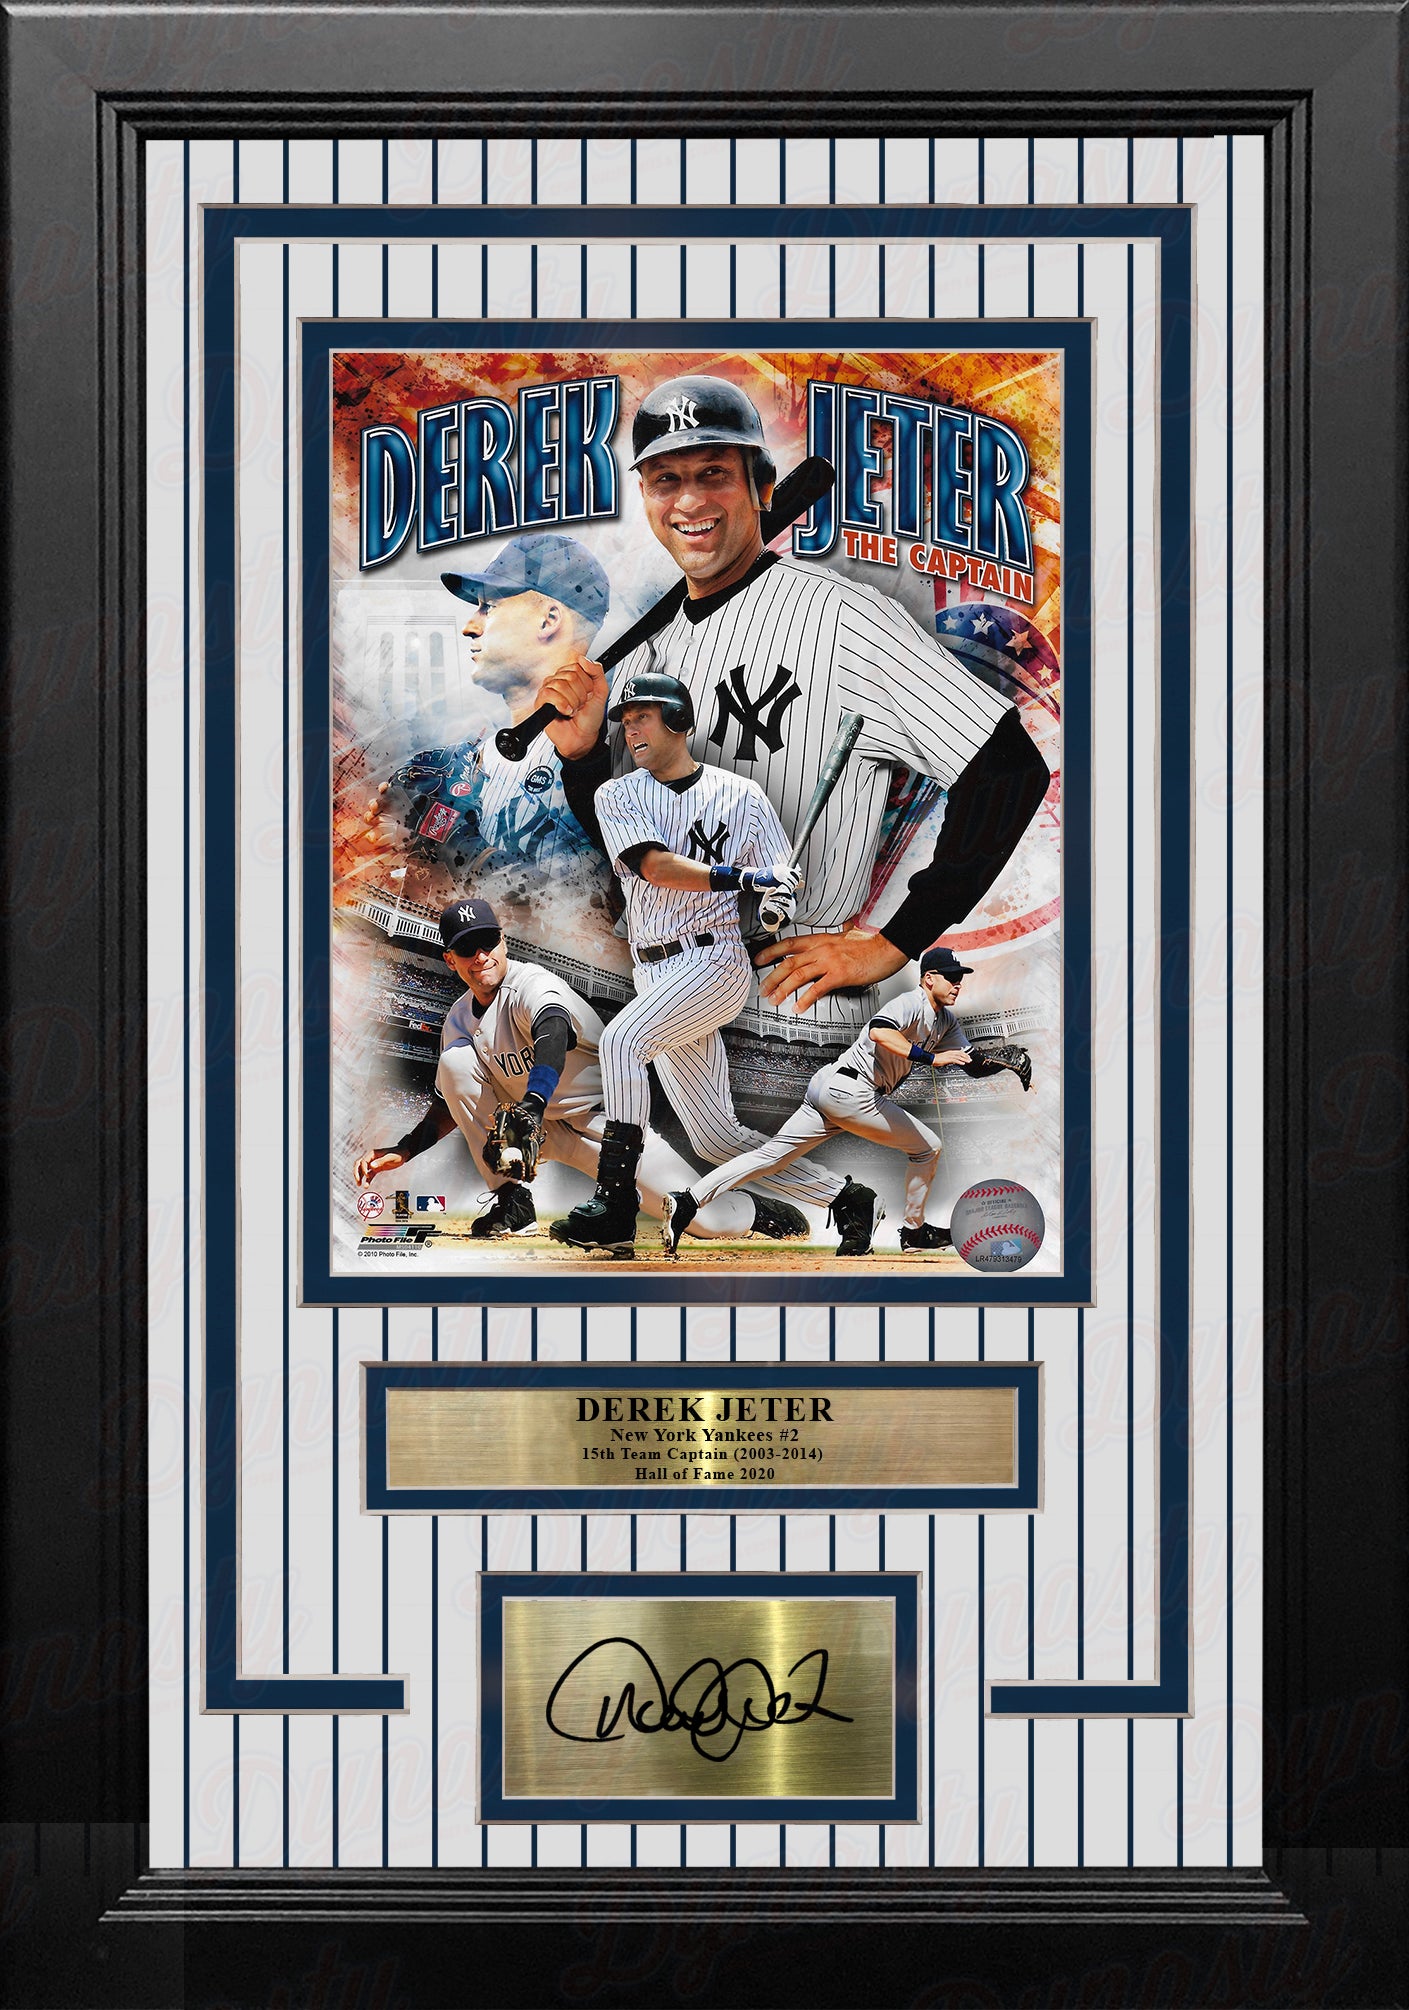 Derek Jeter Captain Collage New York Yankees 8" x 10" Framed Baseball Photo with Engraved Autograph - Dynasty Sports & Framing 